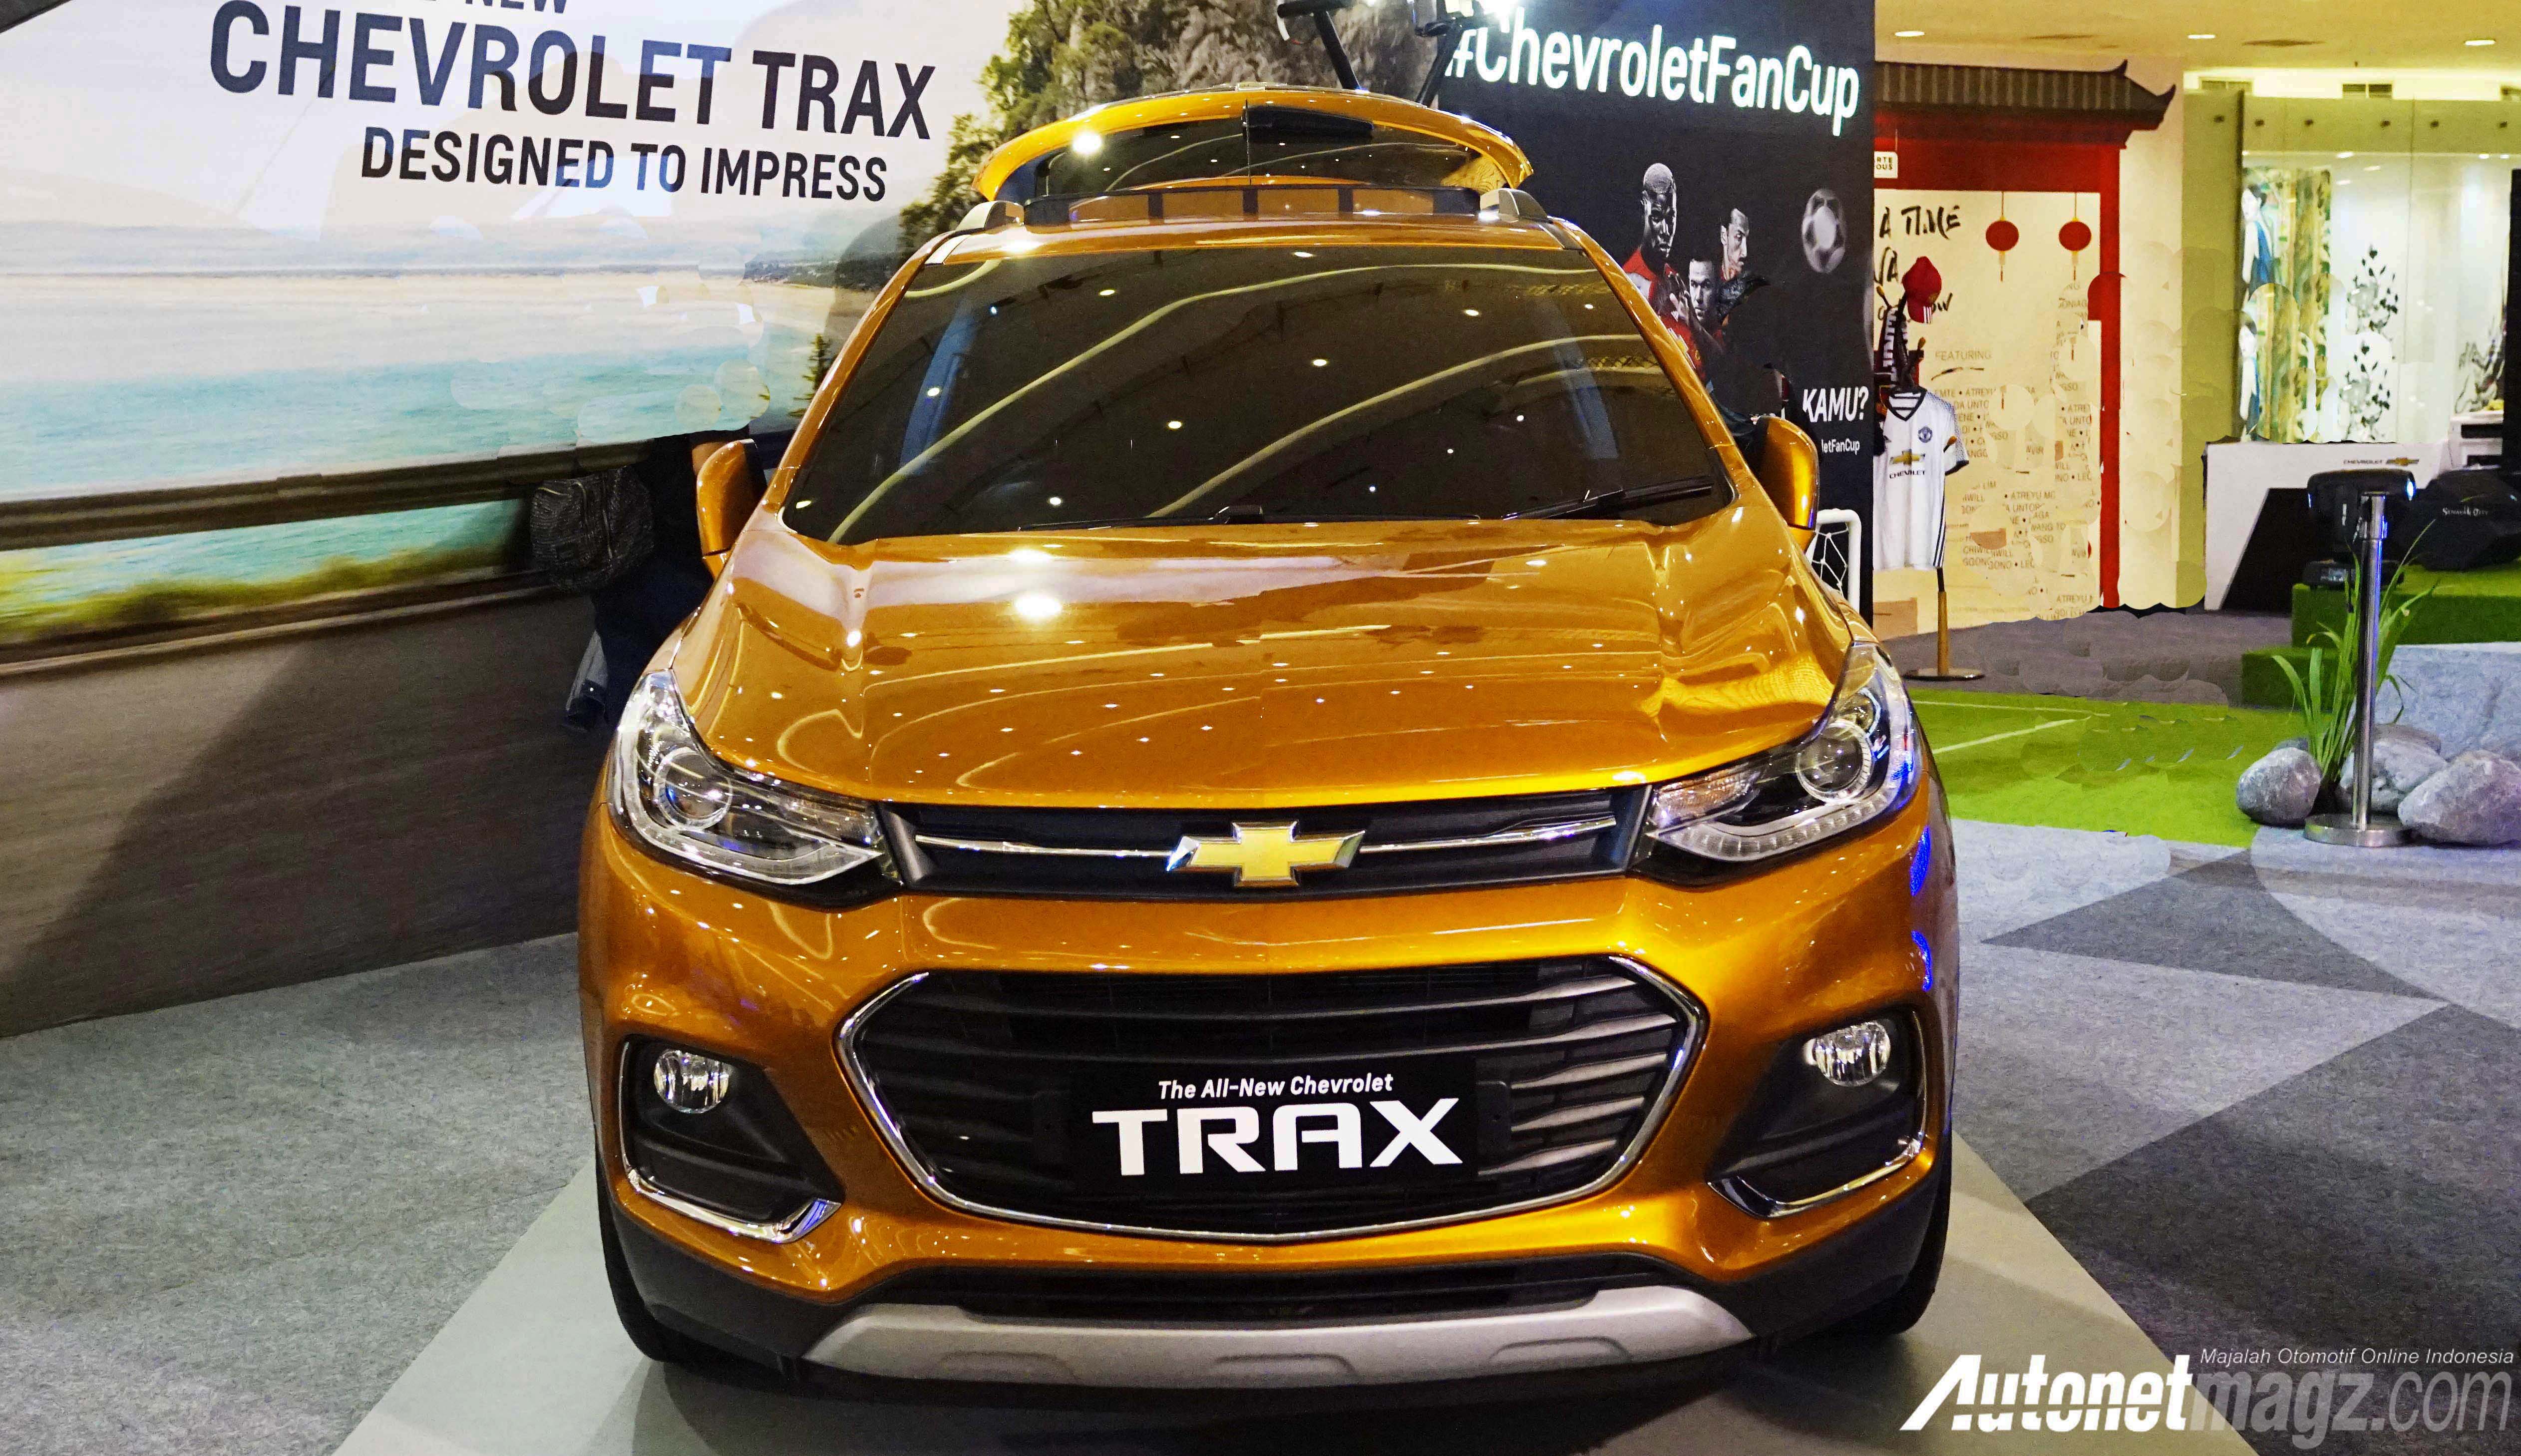 Chevrolet, _DSC3725 copy copy: First Impression Review New Chevrolet Trax Facelift 2017